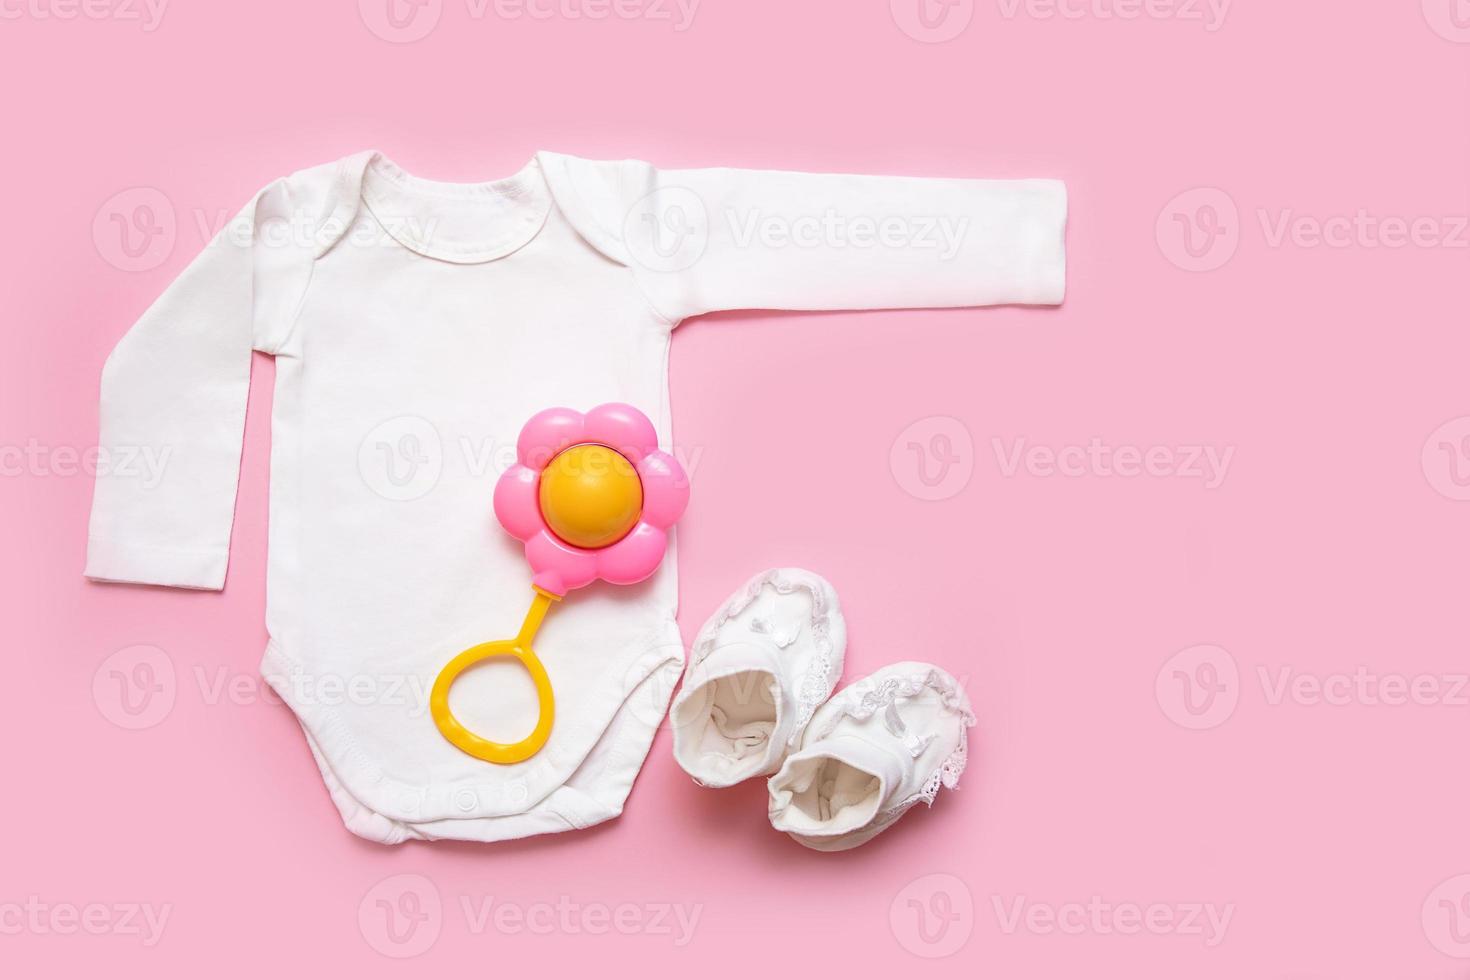 bodysuit, rattle and booties for a newborn on a pink background photo